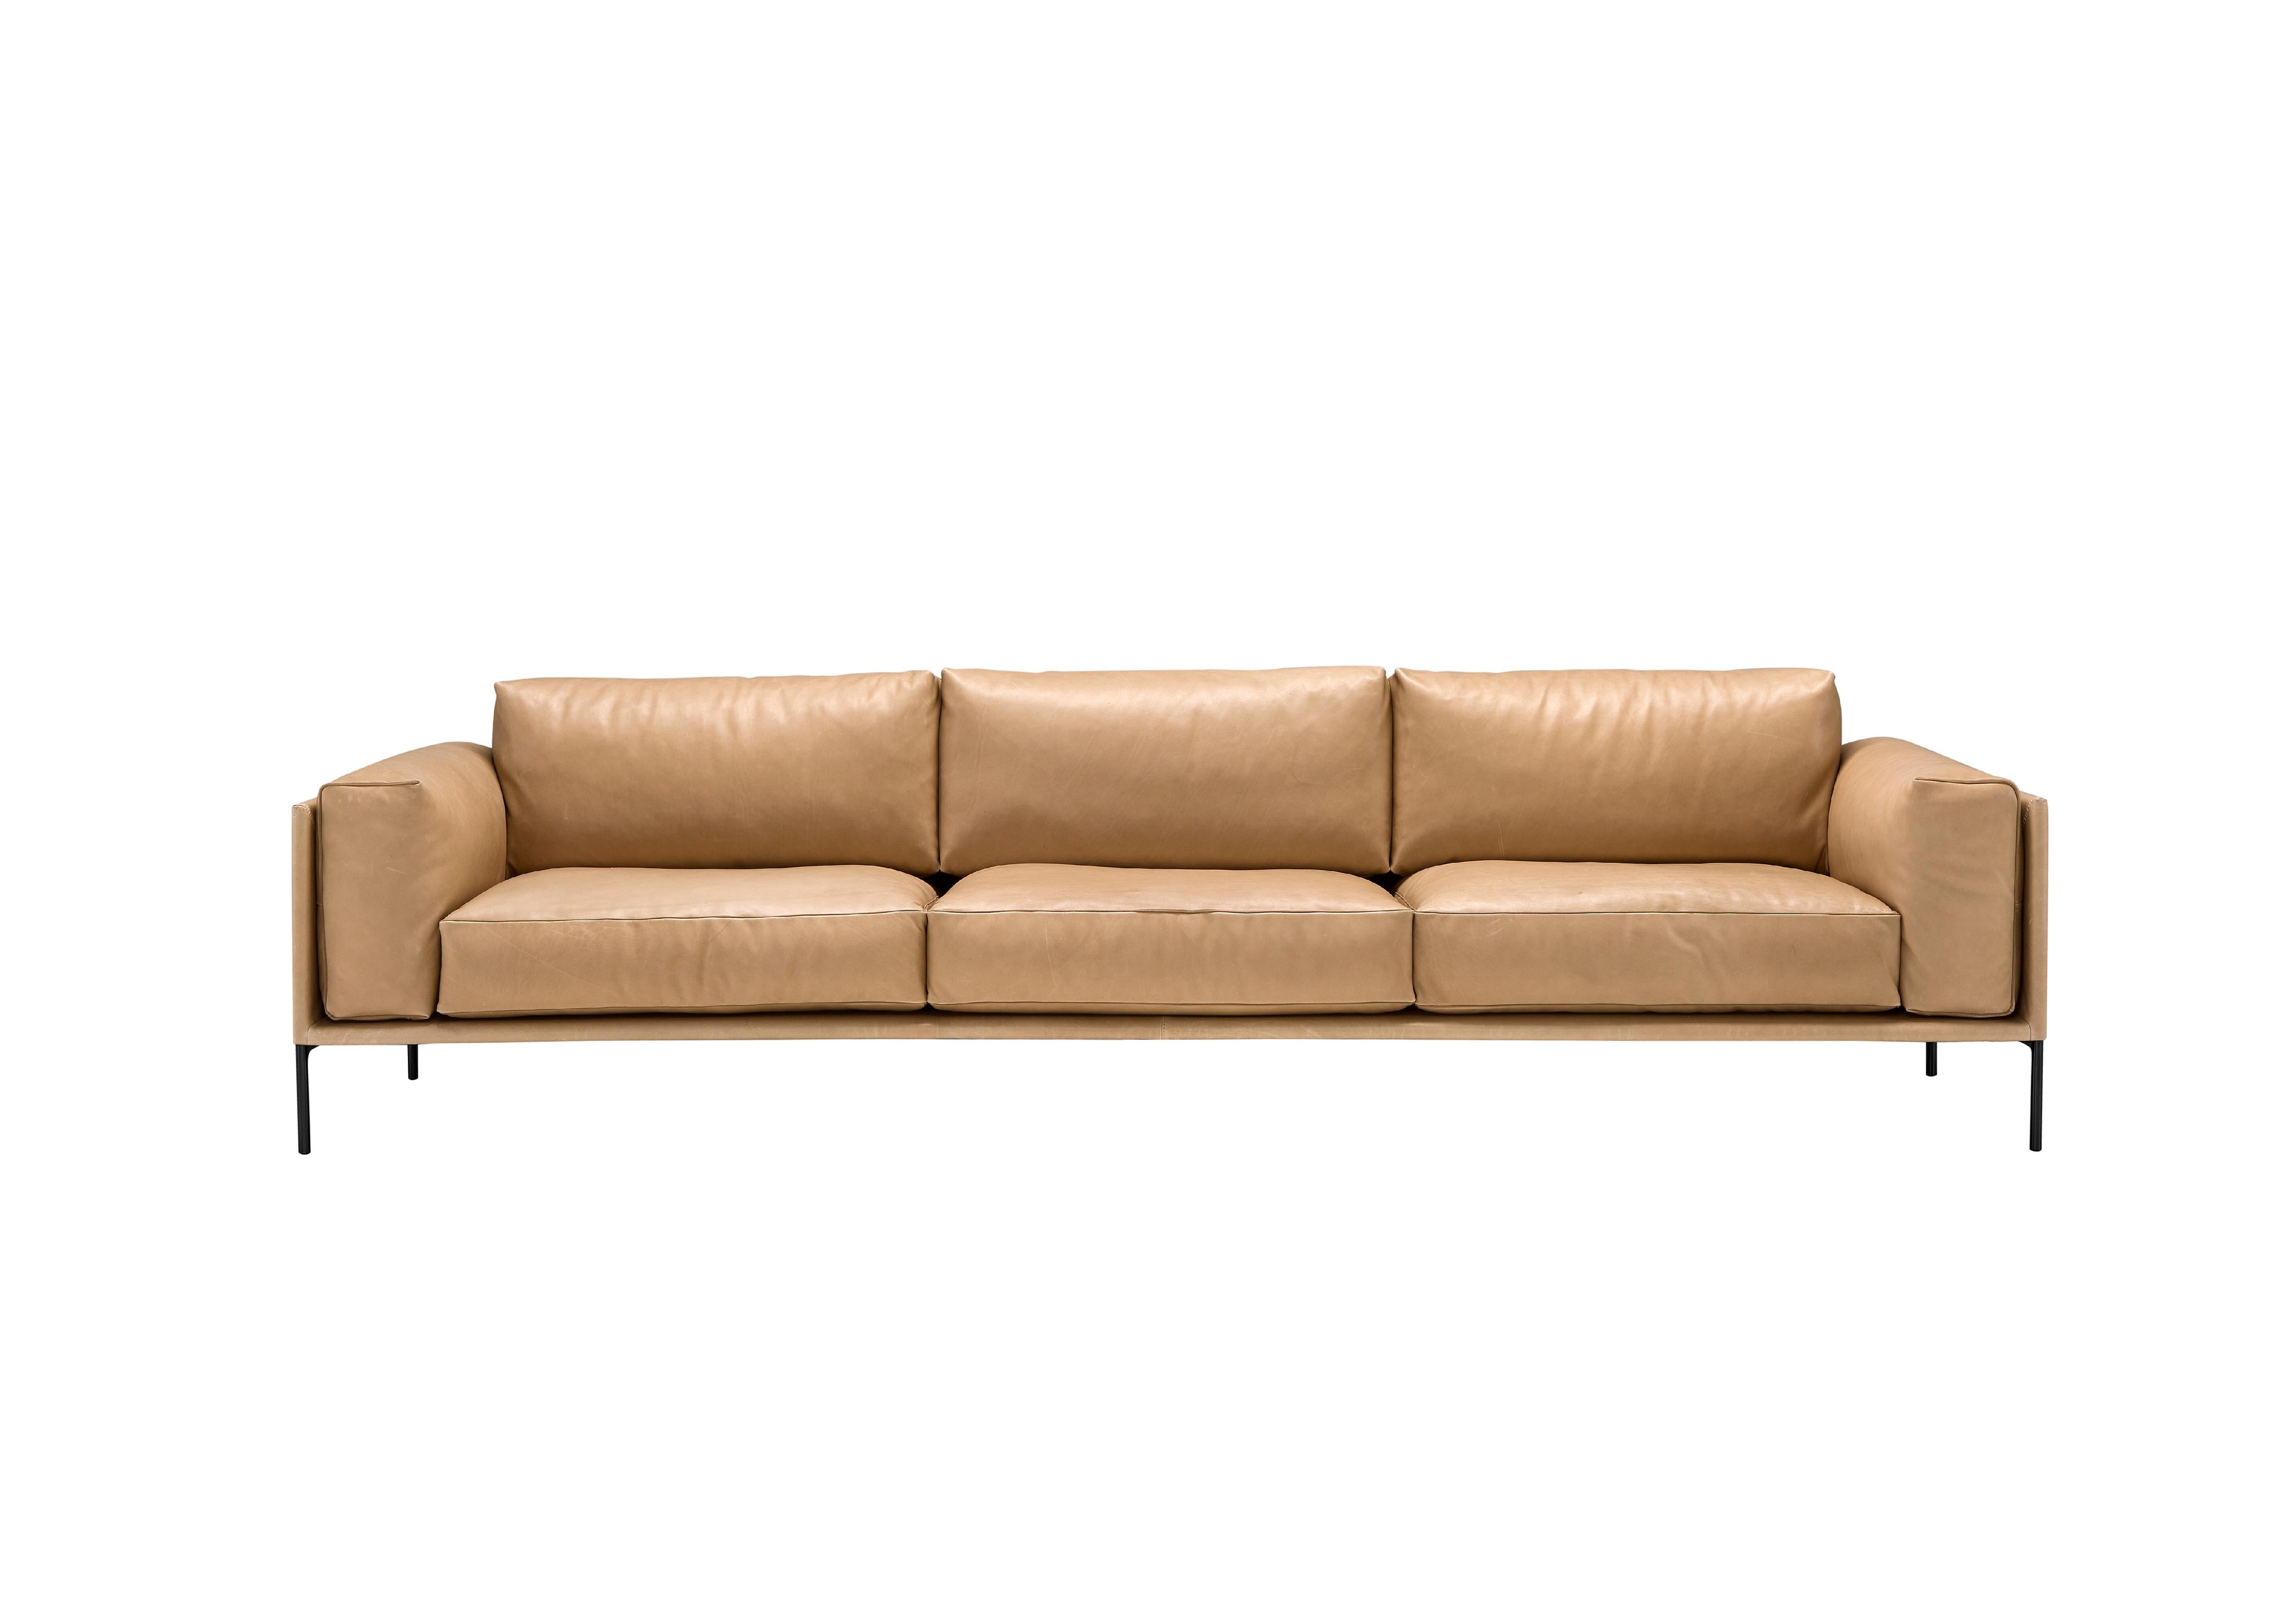 Sofa Giorgio by Amura Lab 
Designer: Emanuel Gargano

Configuration: 421P
Model shown: Leather - Legacy 8003

“Perfect synthesis of form and function, comfort” A rigid and regular shell, welcomes soft and enveloping seats and backs. Giorgio has the